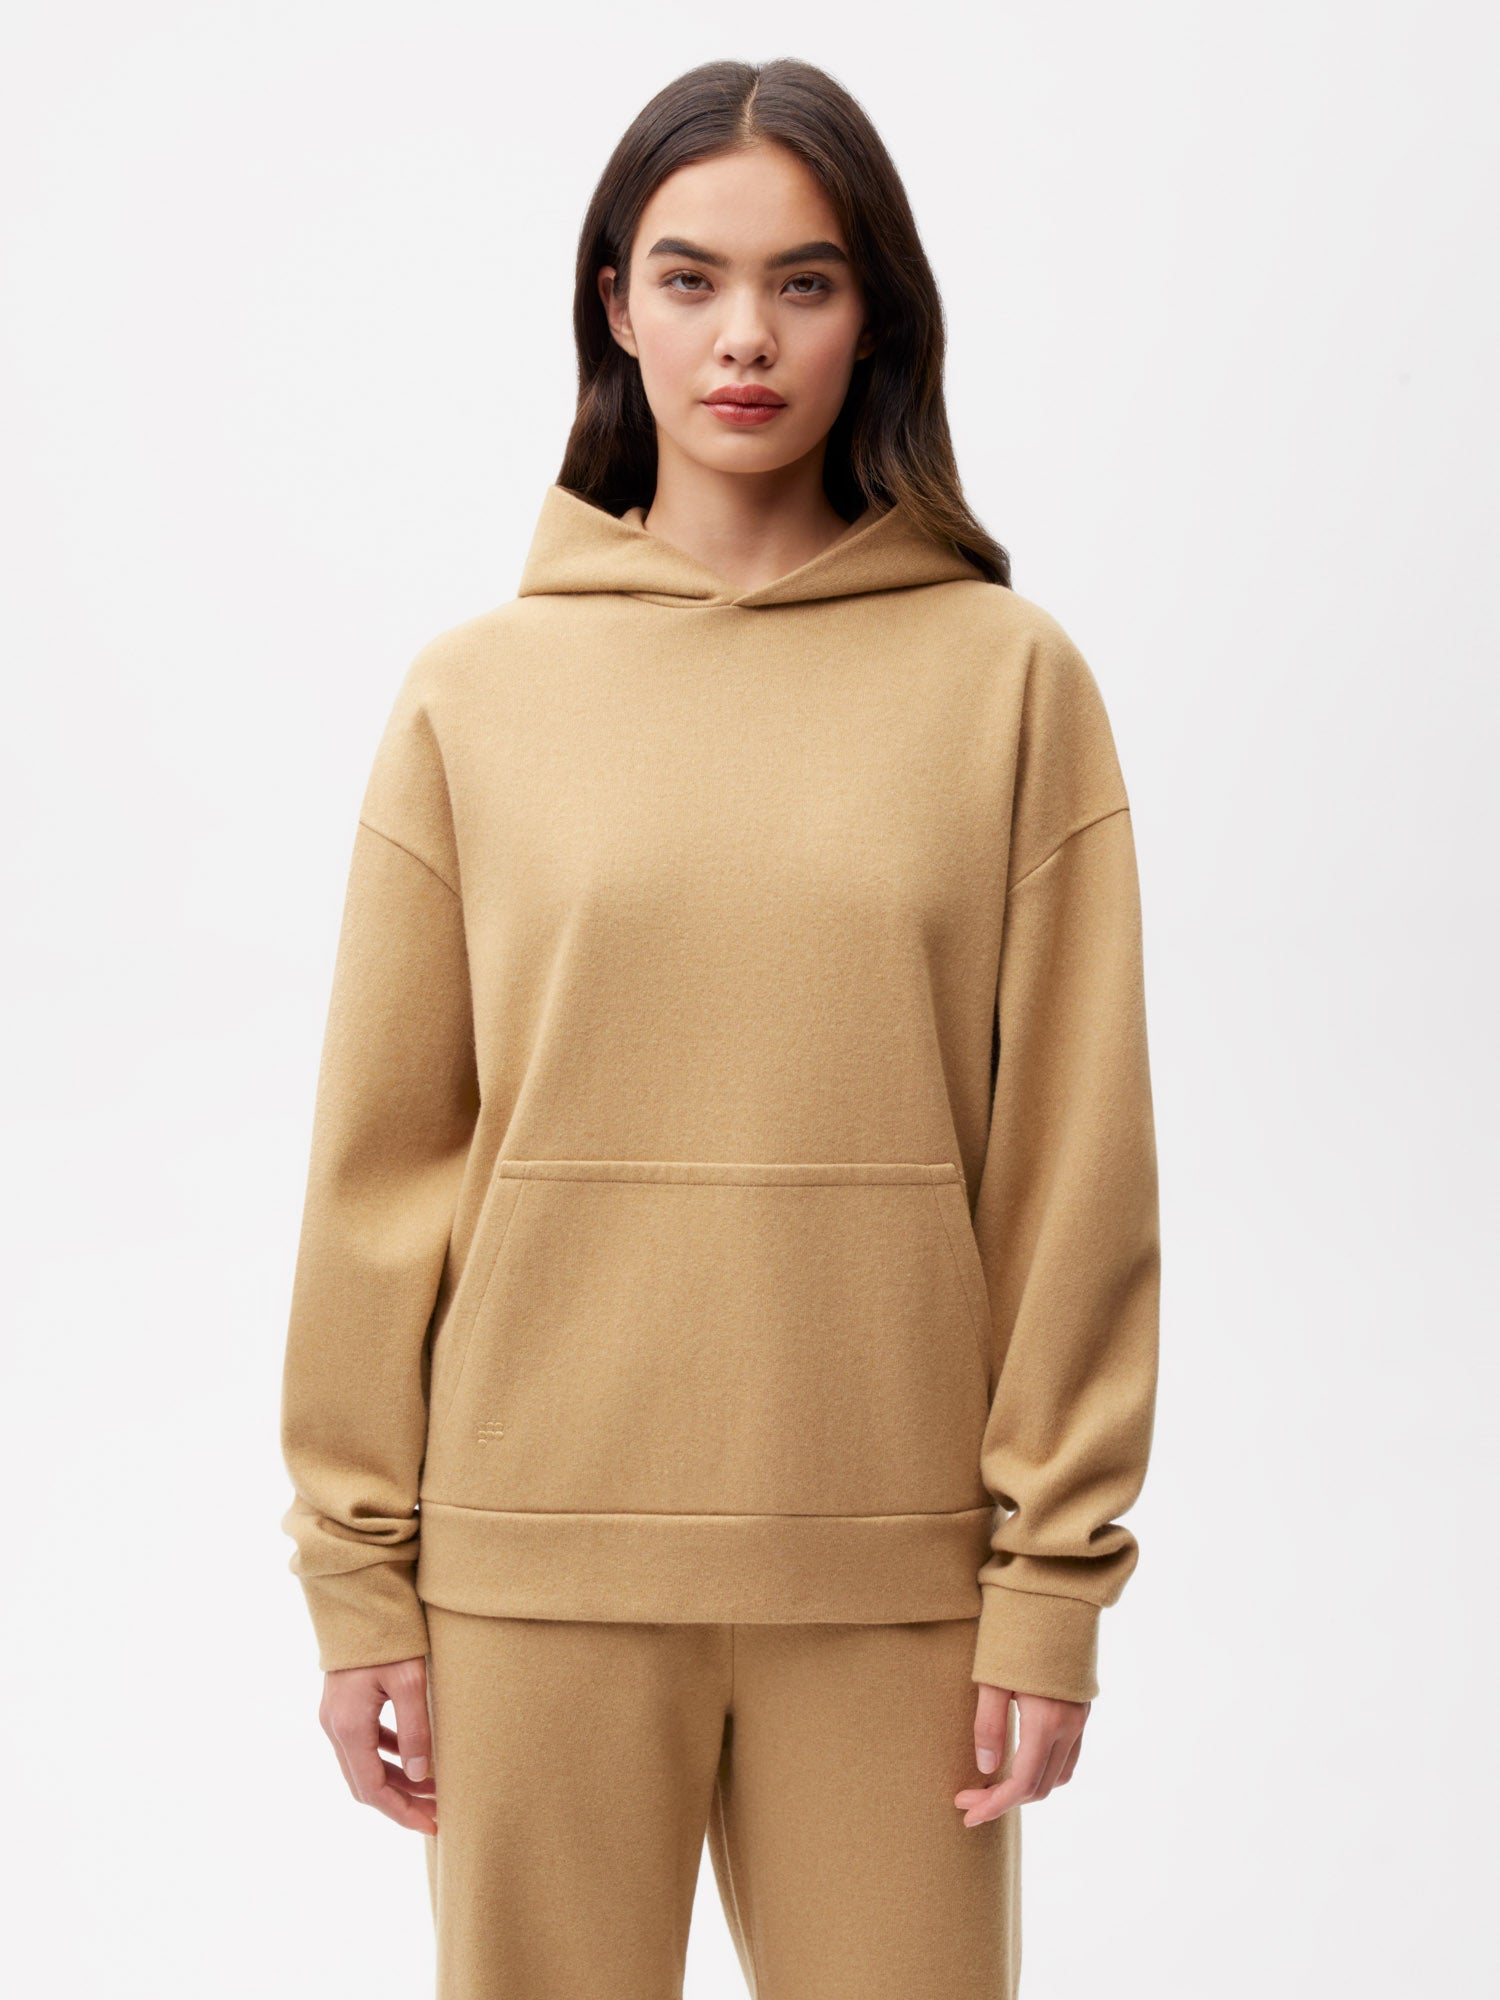 Recycled-Wool-Jersey-Hoodie-with-Pocket-Camel-Female-1